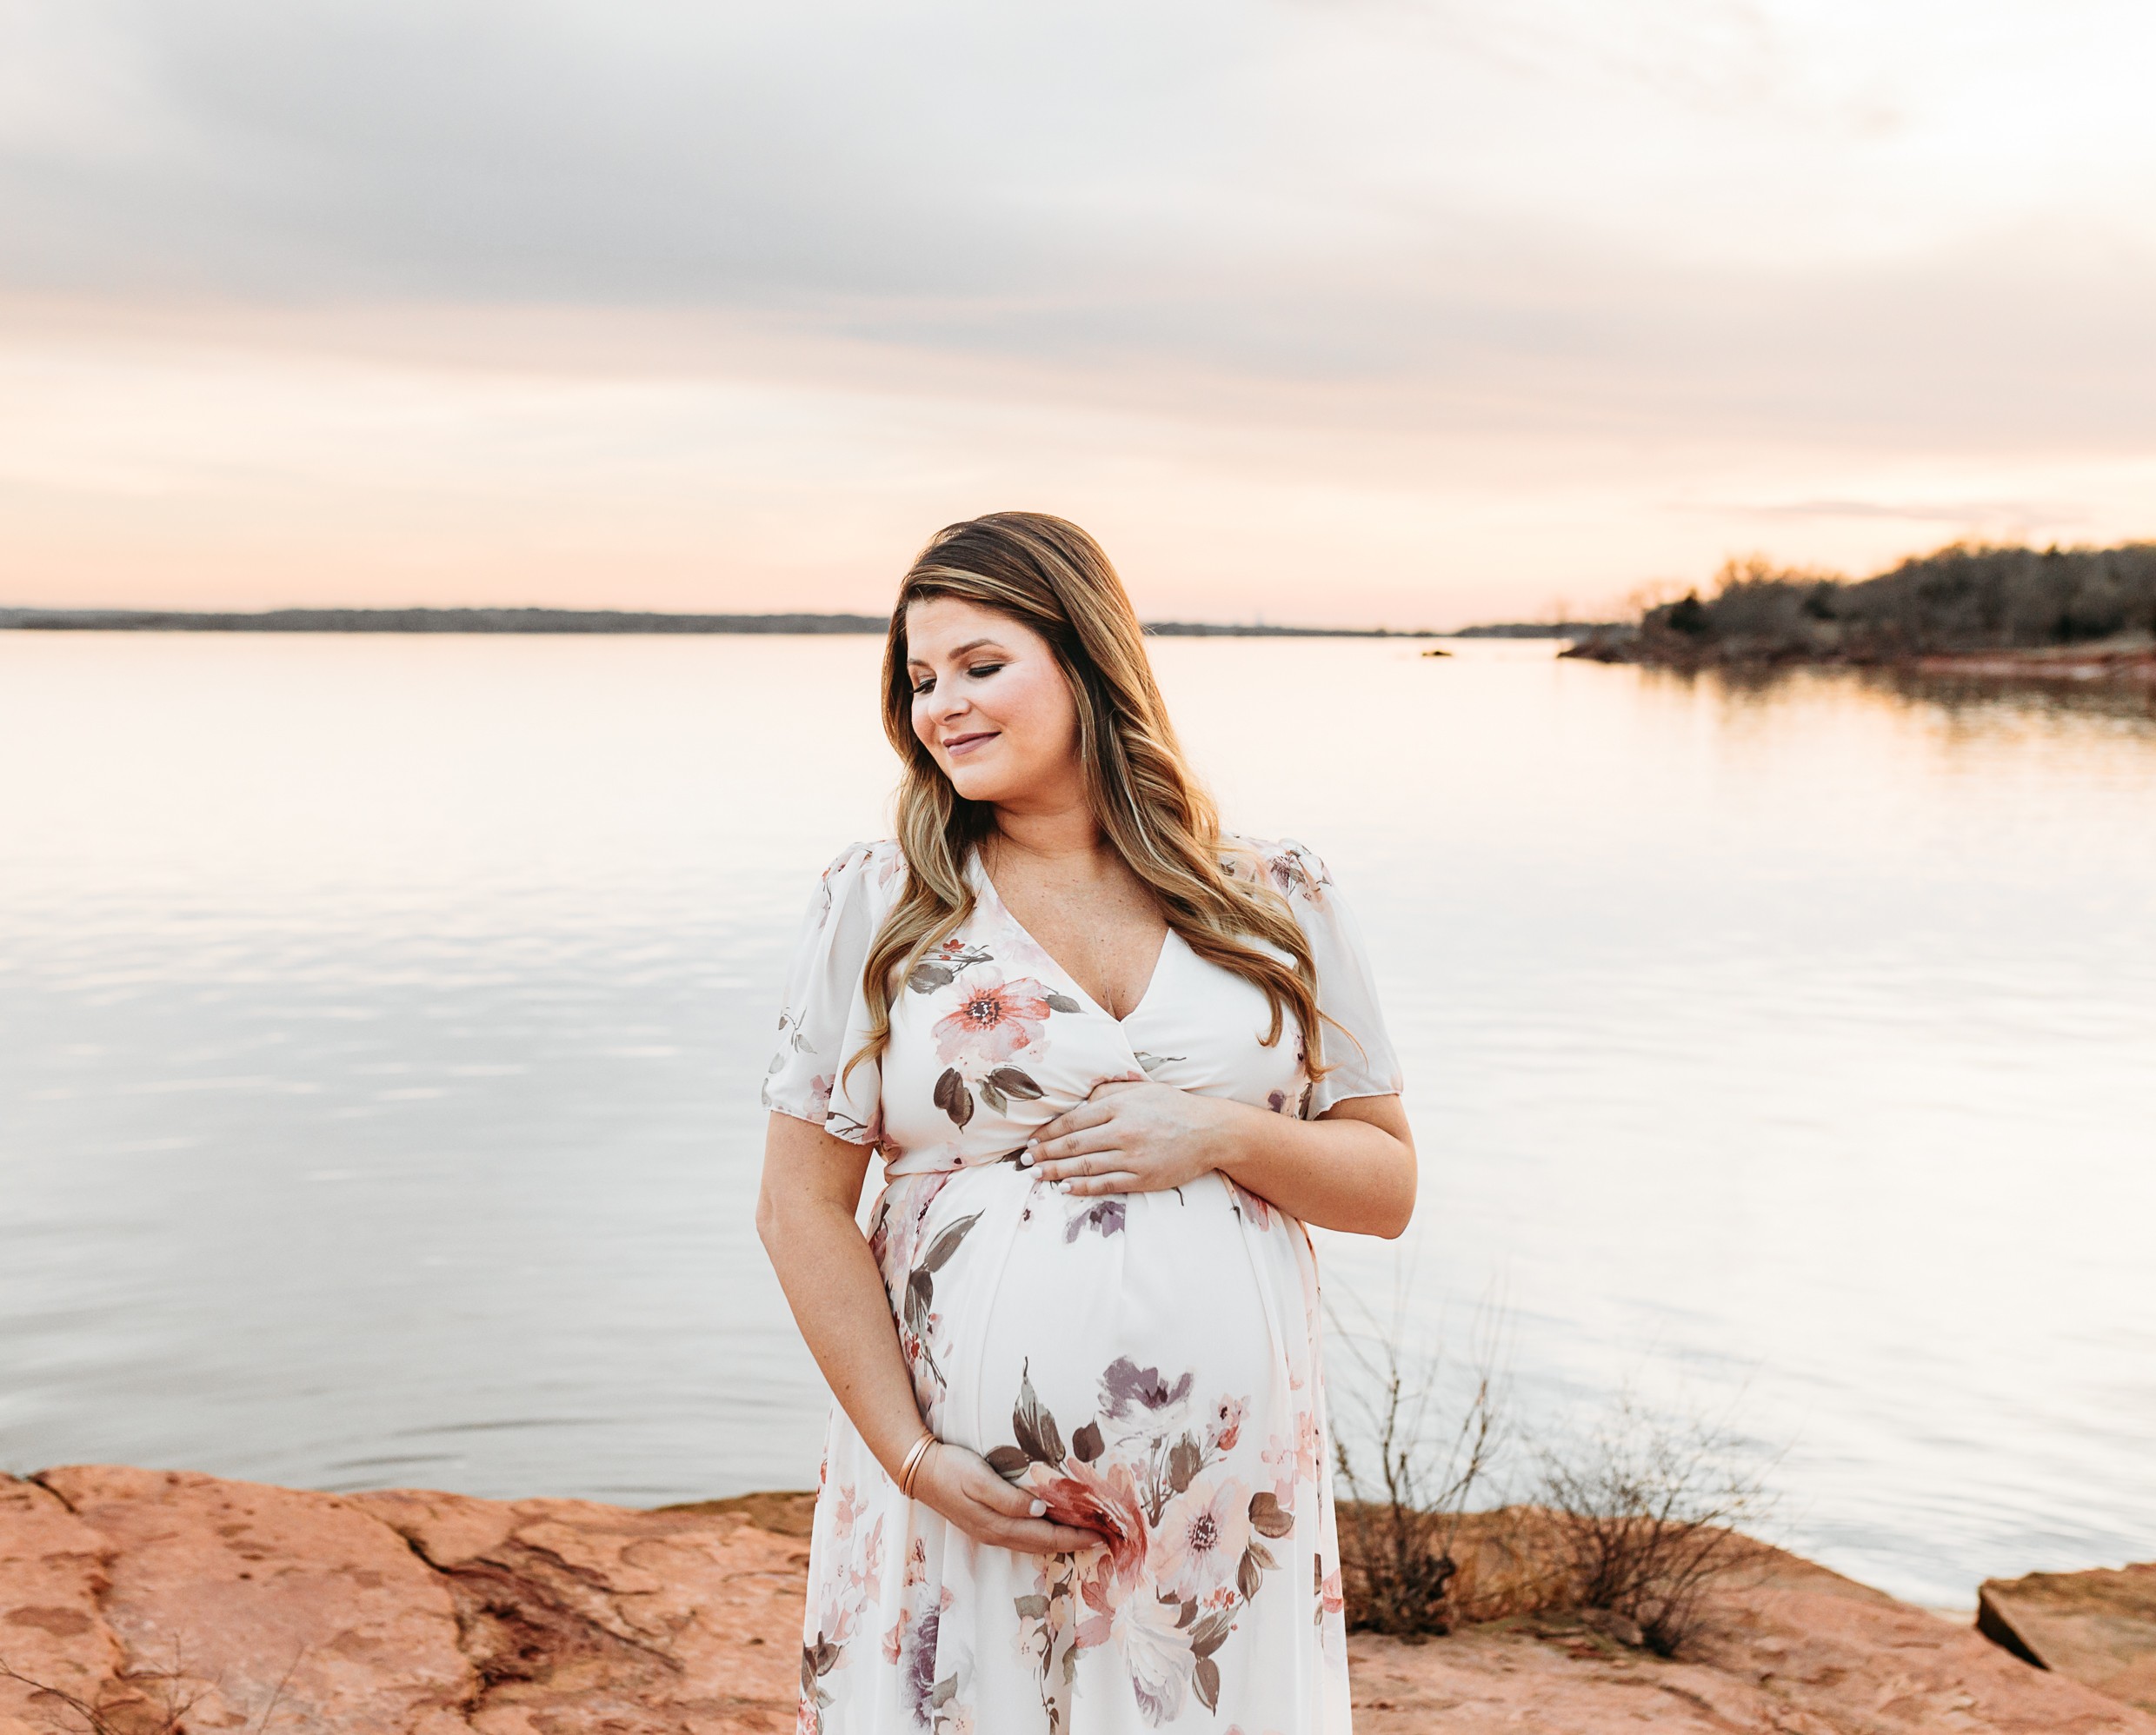 An expecting mom doing a photo session in Edmond, OK.